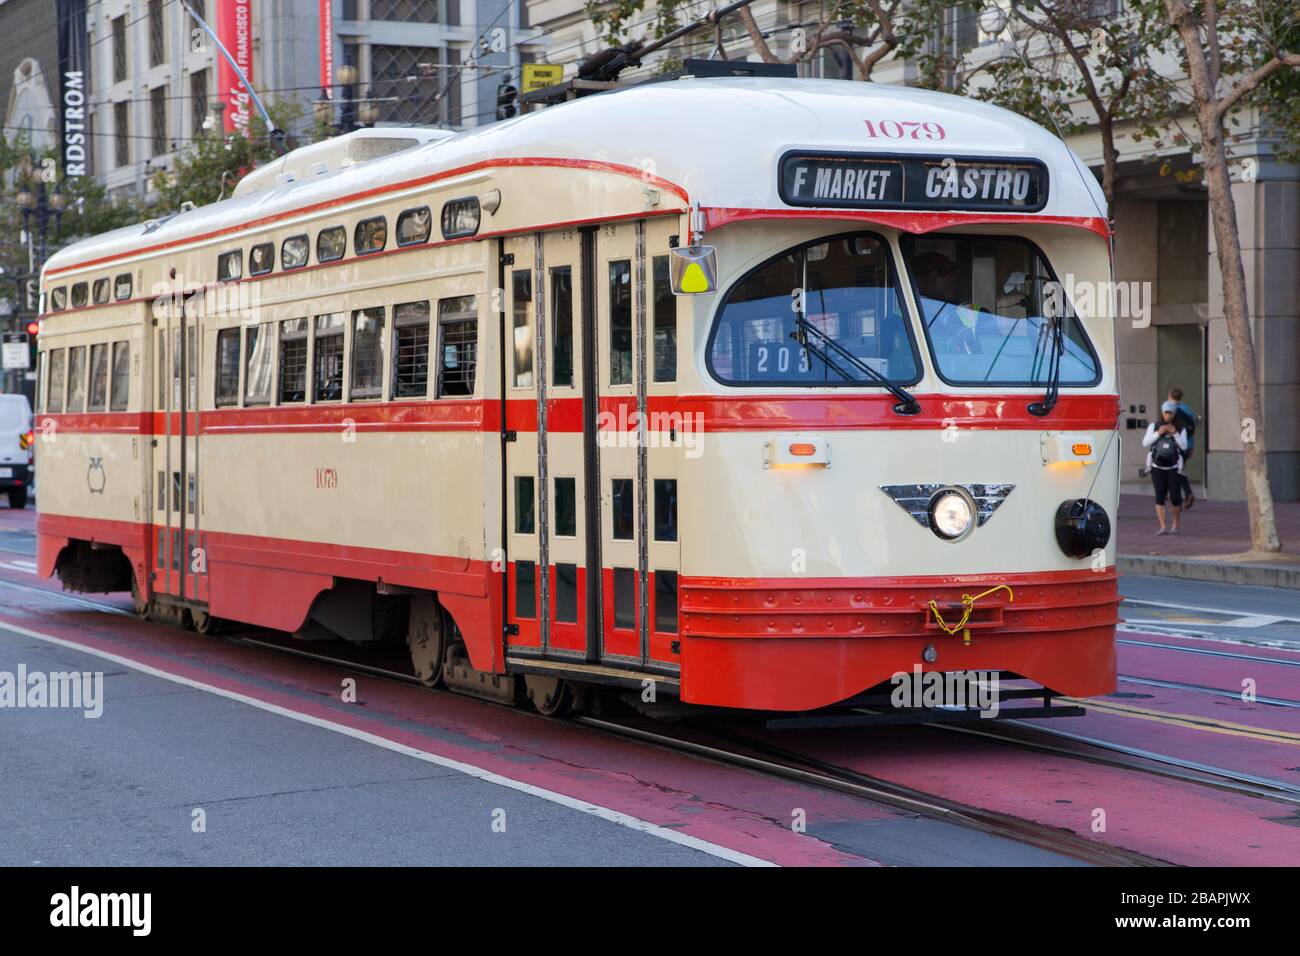 San Francisco, California - August 27, 2019: Heritage streetcar Twin City Rapid number 1079 in Detroit Livery at Market Street, San Francisco, Califor Stock Photo